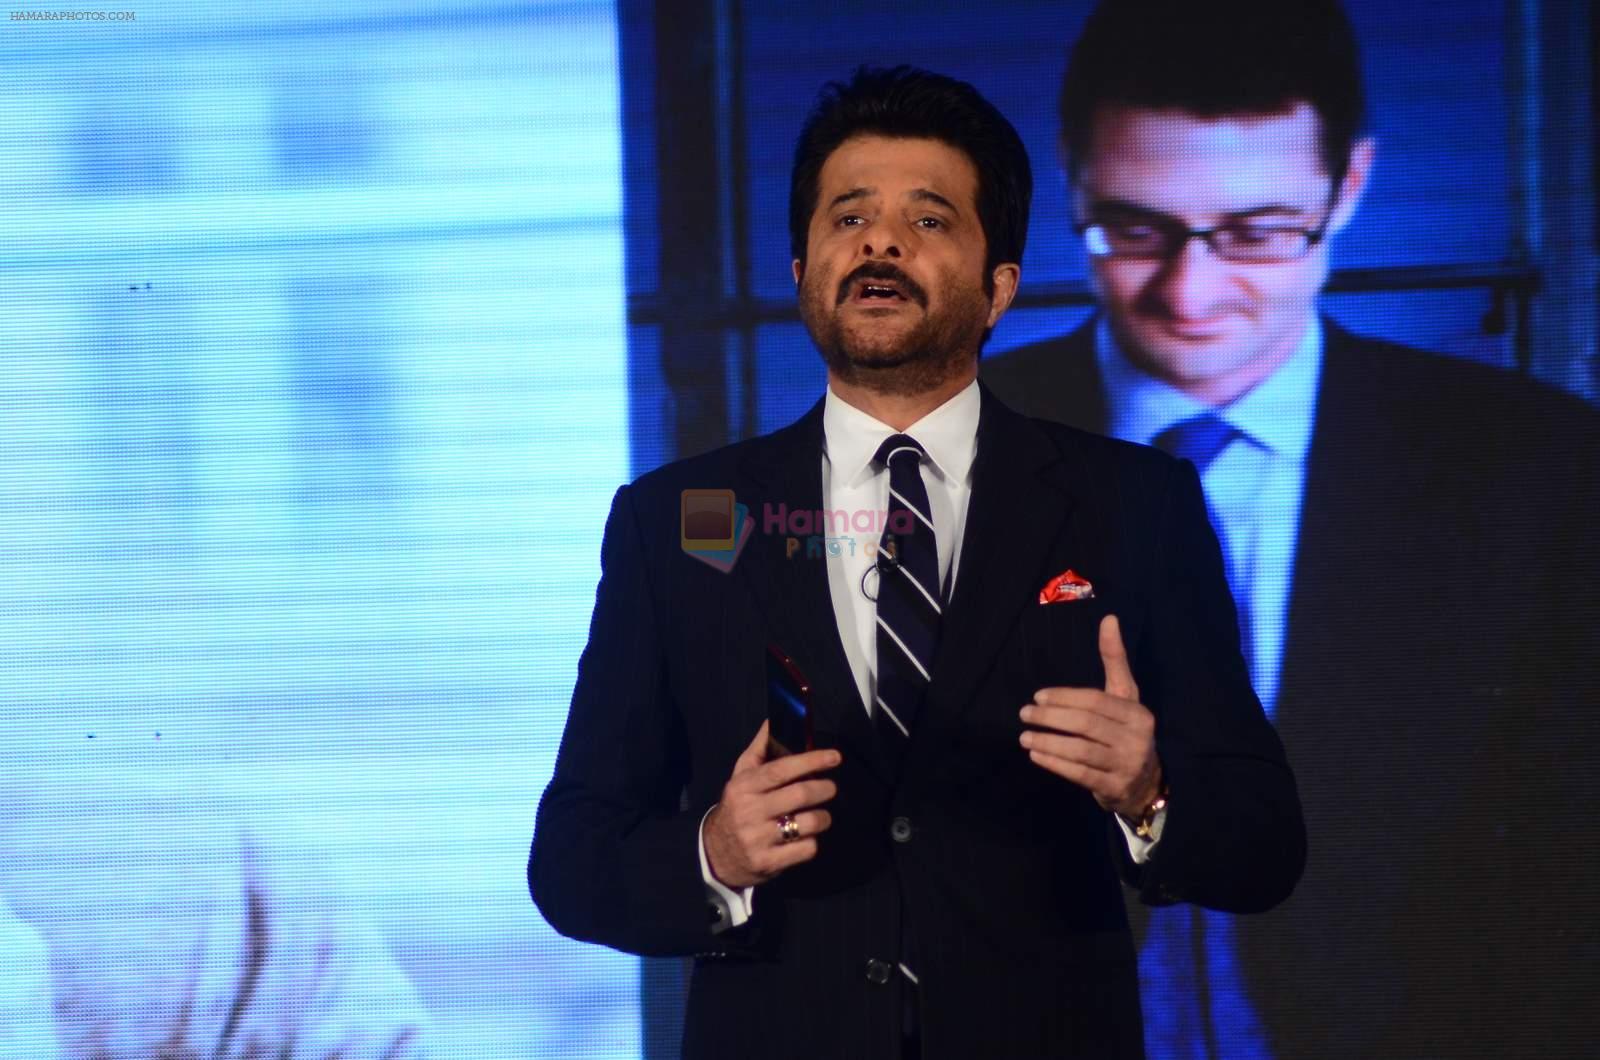 Anil Kapoor and Nargis Fakhri at LG phone launch in J W Marriott on 30th April 2015